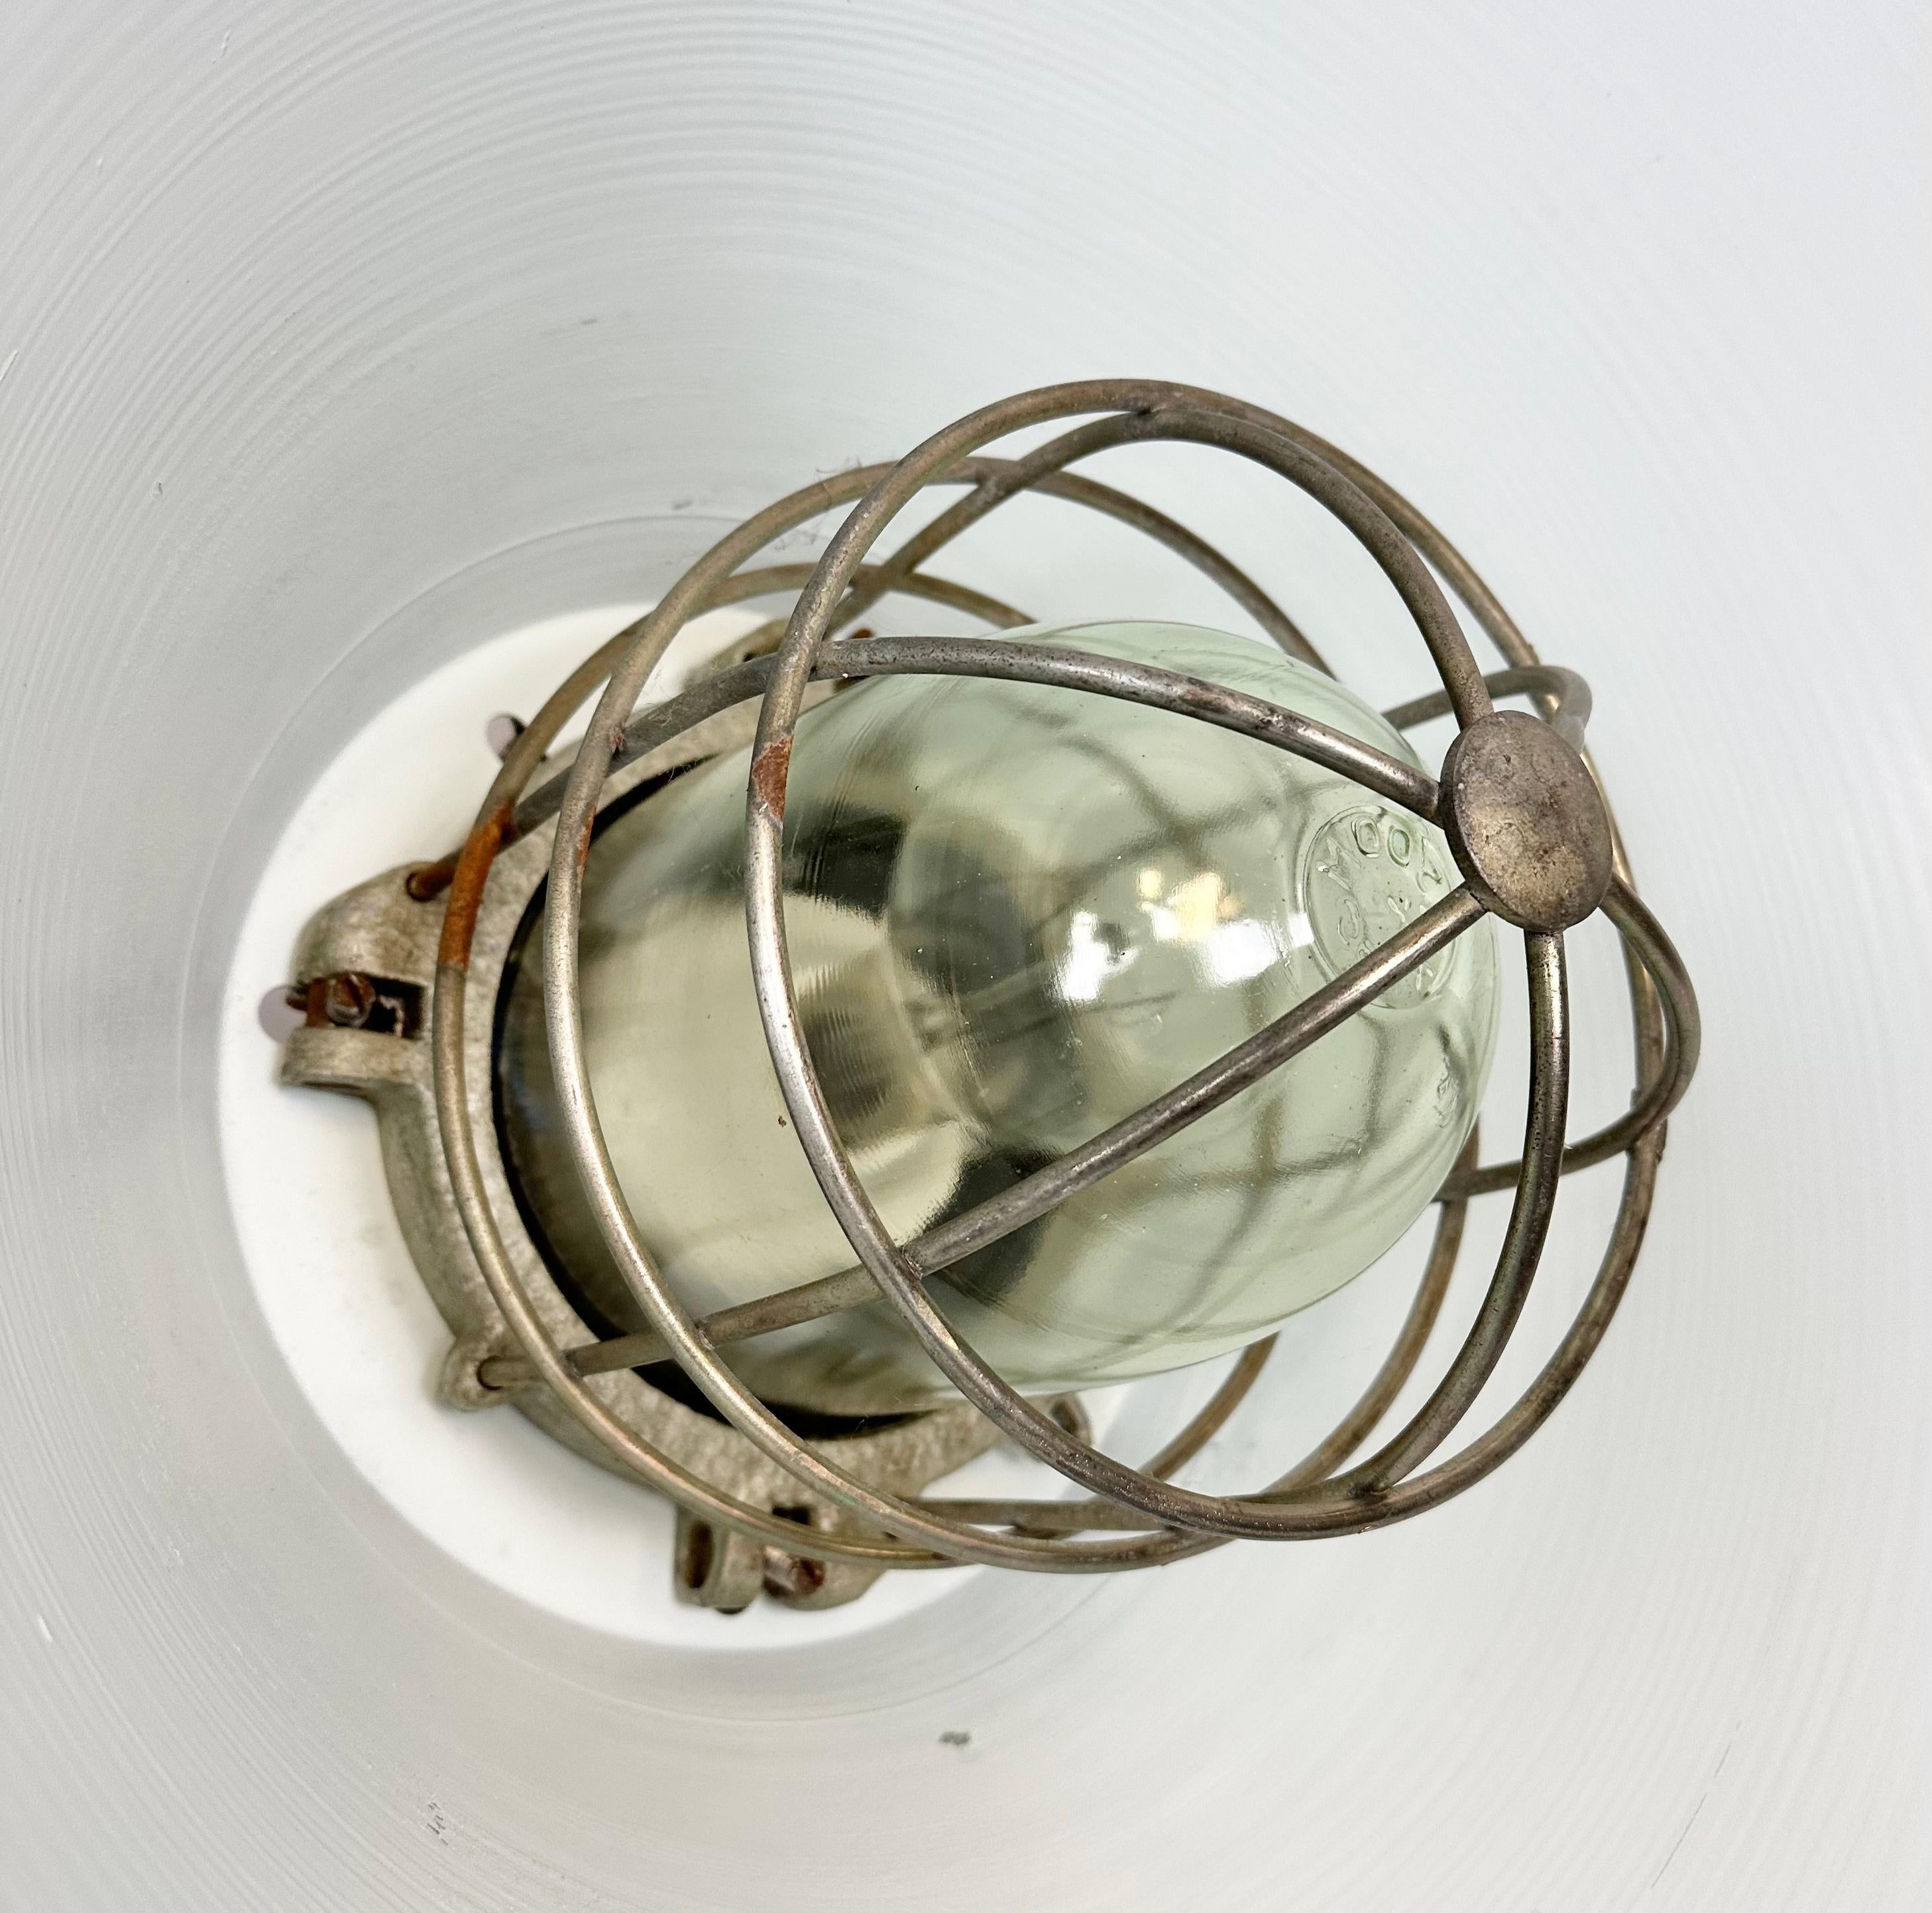 Grey Industrial Explosion Proof Lamp with Aluminum Shade from Zaos, 1970s For Sale 11